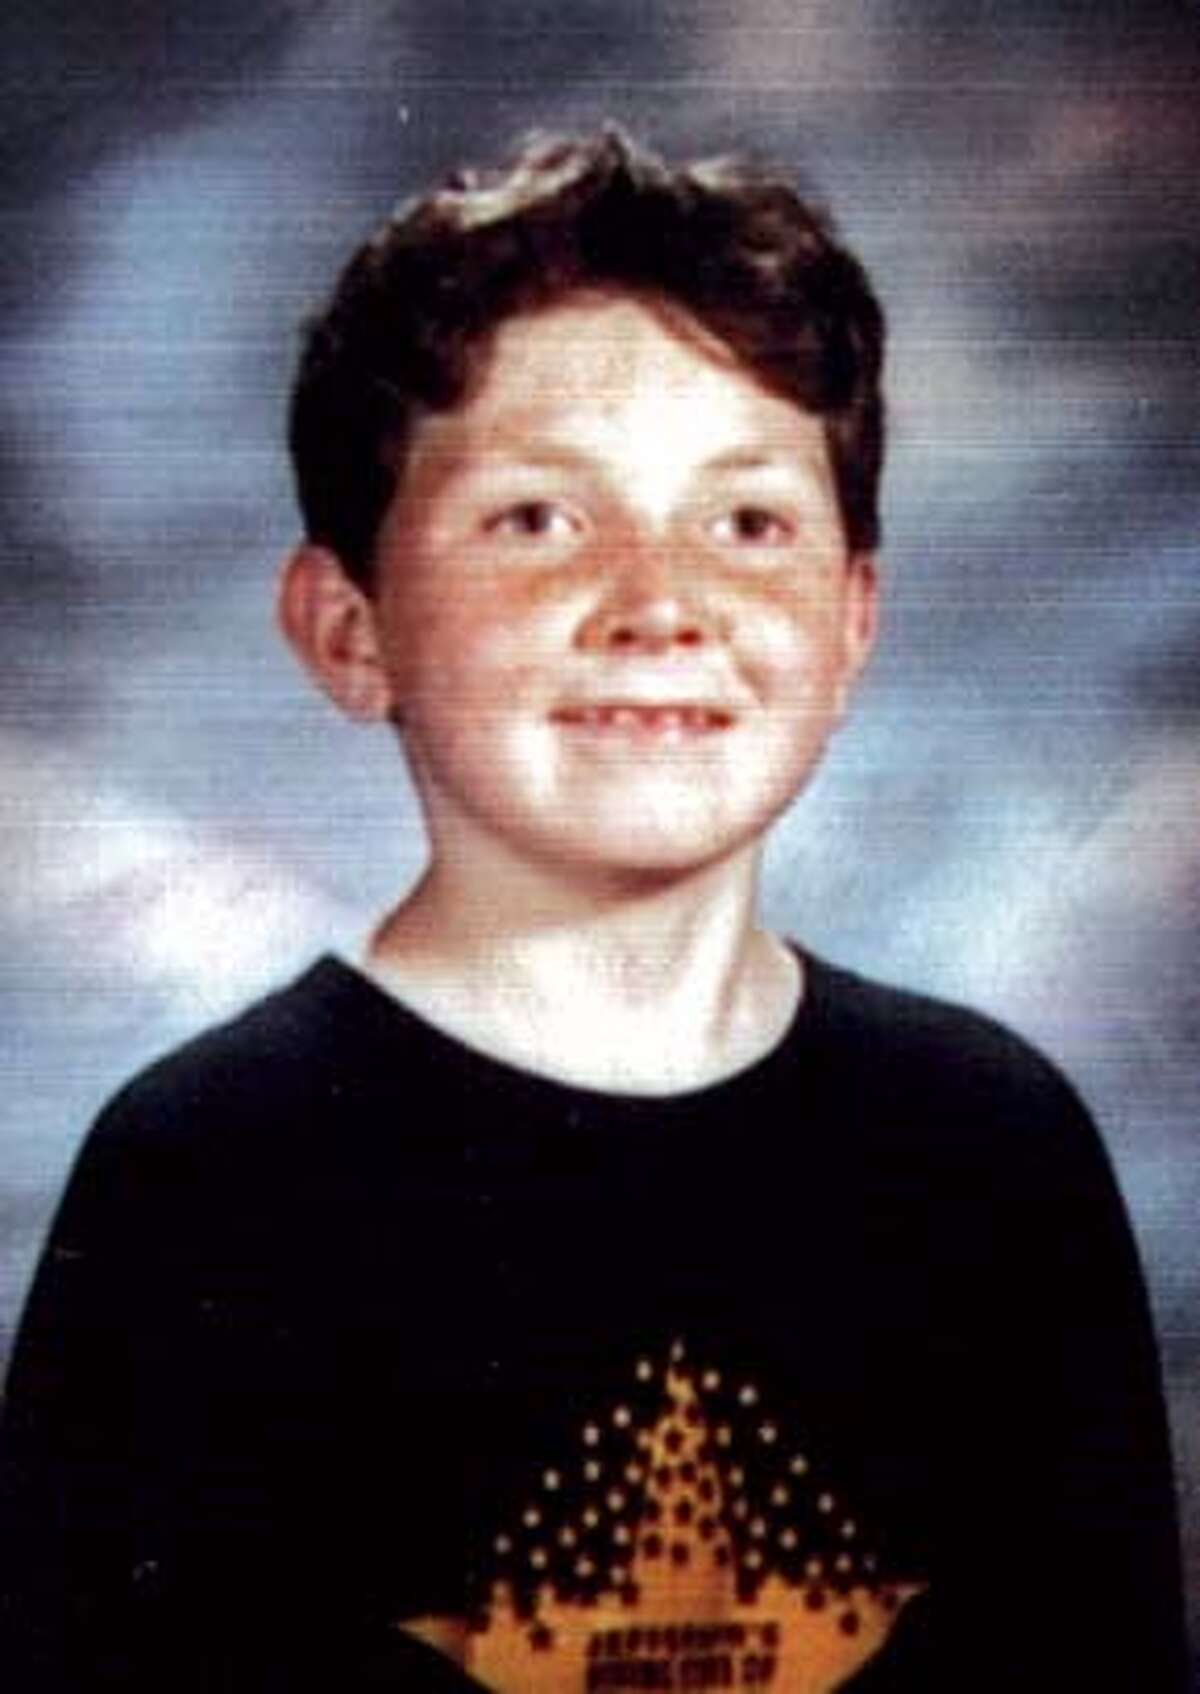 MANDATORY CREDIT FOR PHOTOG AND SF CHRONICLE/ -MAGS OUTDOGMAUL_125_MJM.jpg A school portrait of Nicholas Scott Faibish who was a 6th grader at Roosevelt Middle School. A 12-year-old boy, Nicholas Scott Faibish was mauled to death by his family's two pit bulls this afternoon in his apartment in San Francisco's Inner Sunset District as his mother screamed helplessly. The boy was attacked at 711 Lincoln Way across from Golden Gate Park about 3:15 p.m., police said. He was with his mother and two siblings when the 80-pound dogs -- a male named Rex and a female named Ella -- attacked him.